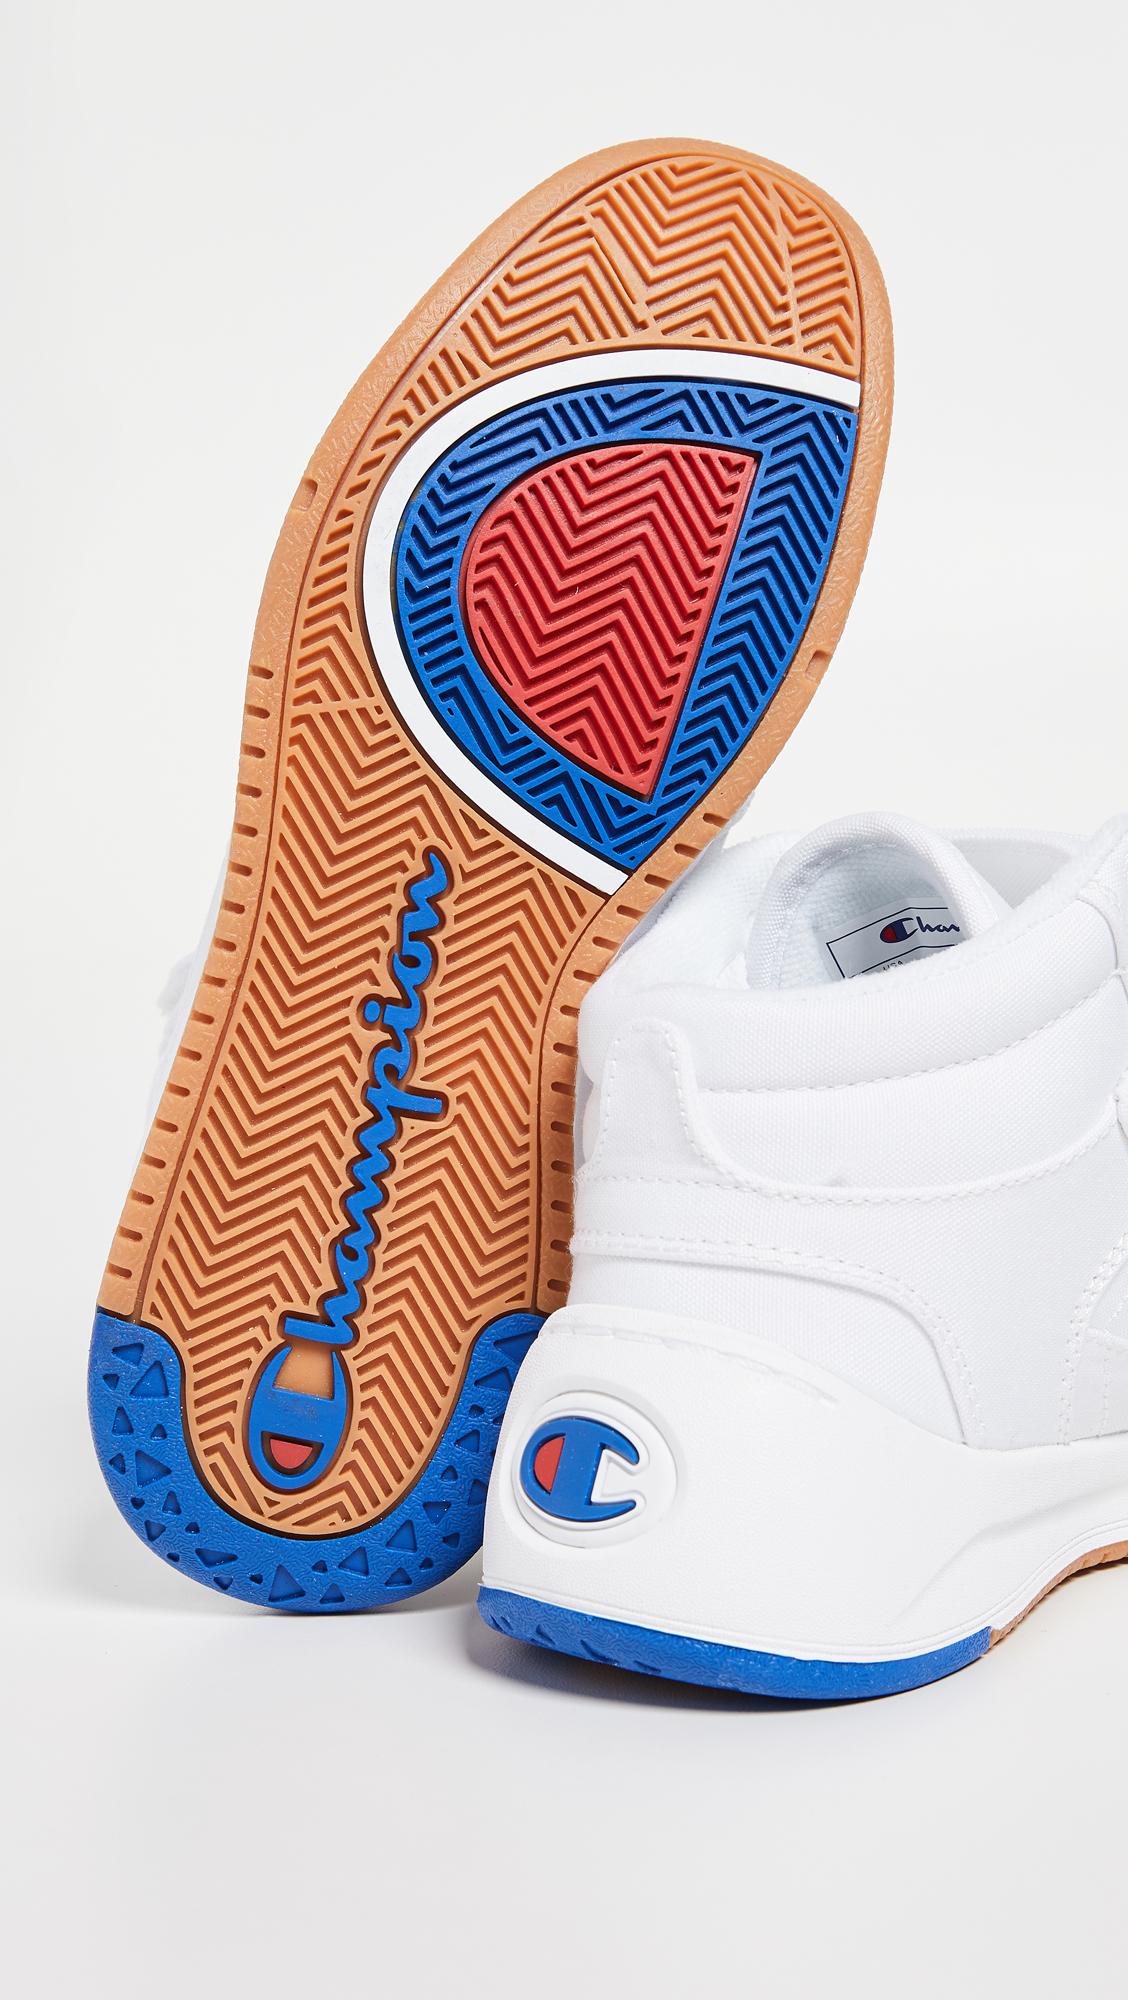 Champion Super C Court Mid Sneakers in White | Lyst